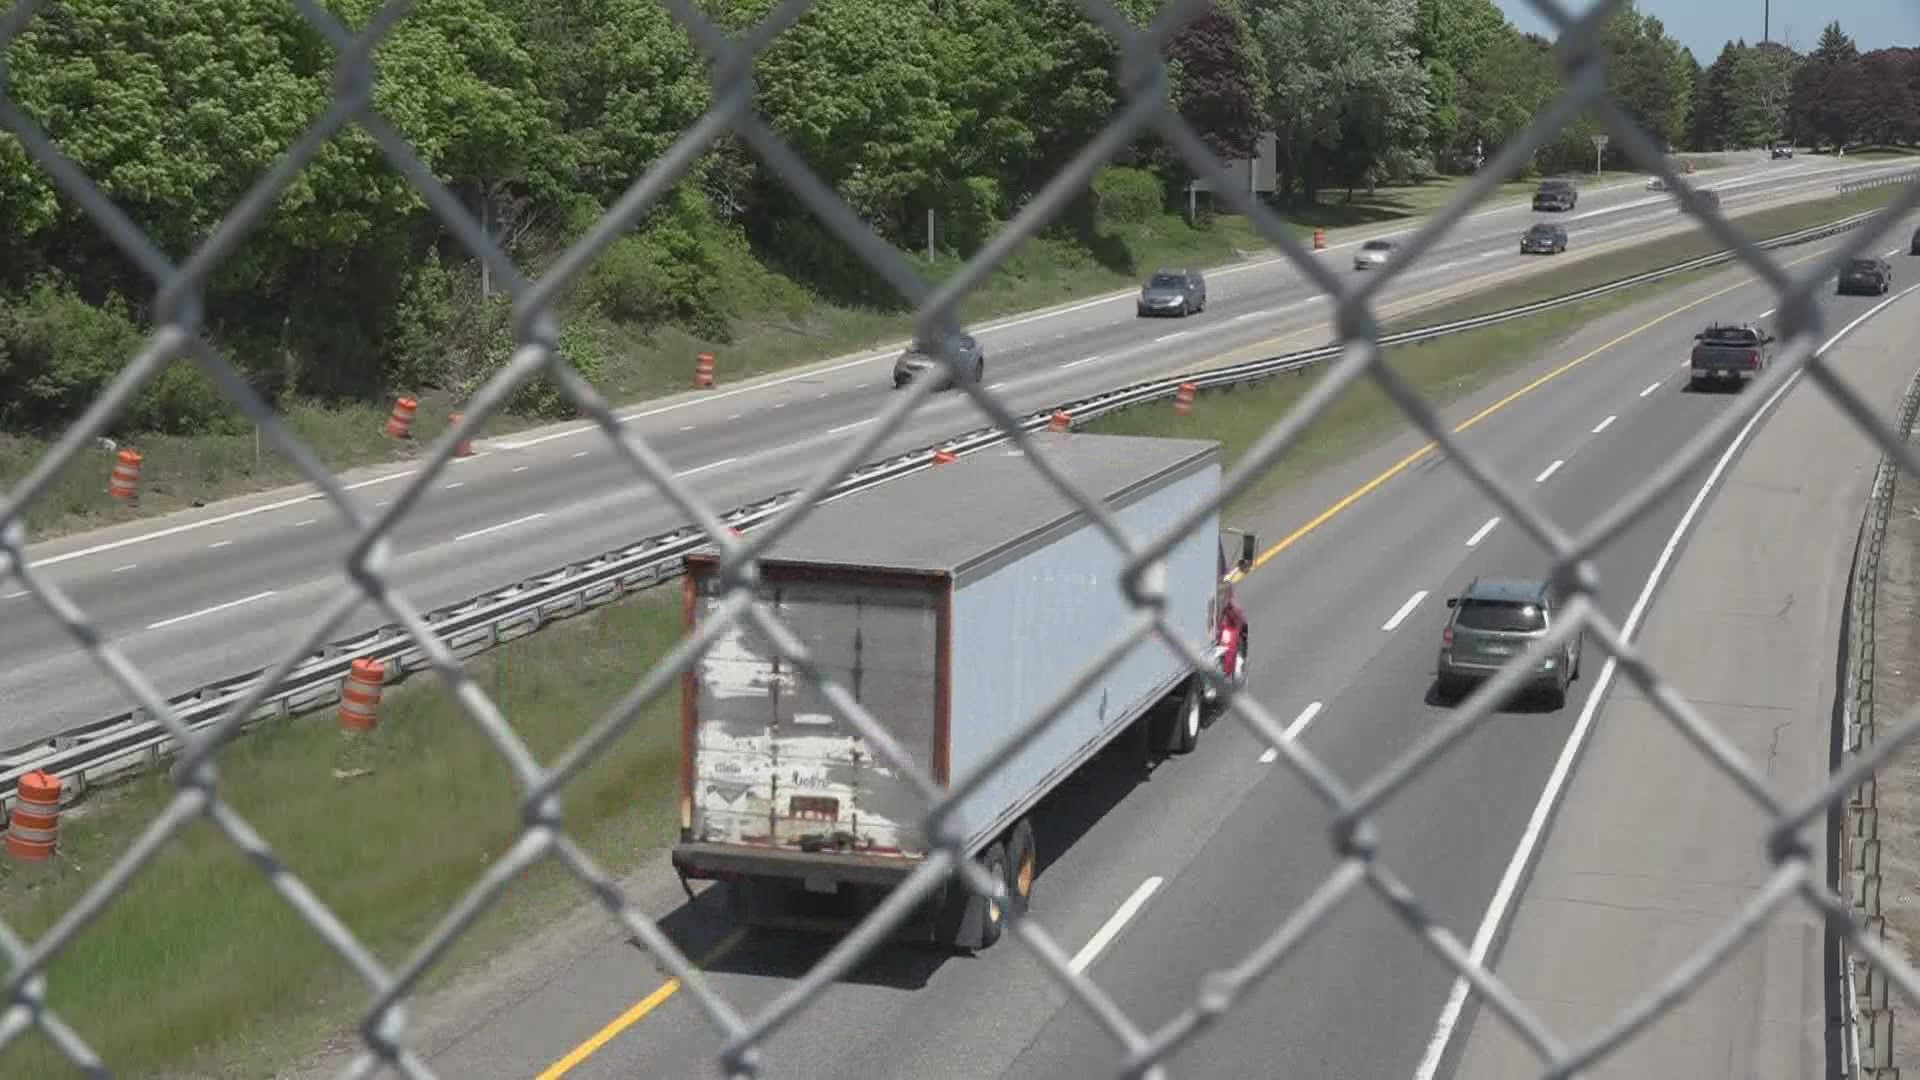 With more cars on the road and more distractions  than ever before, commercial truck drivers want others to keep their distance and be aware of their surroundings.